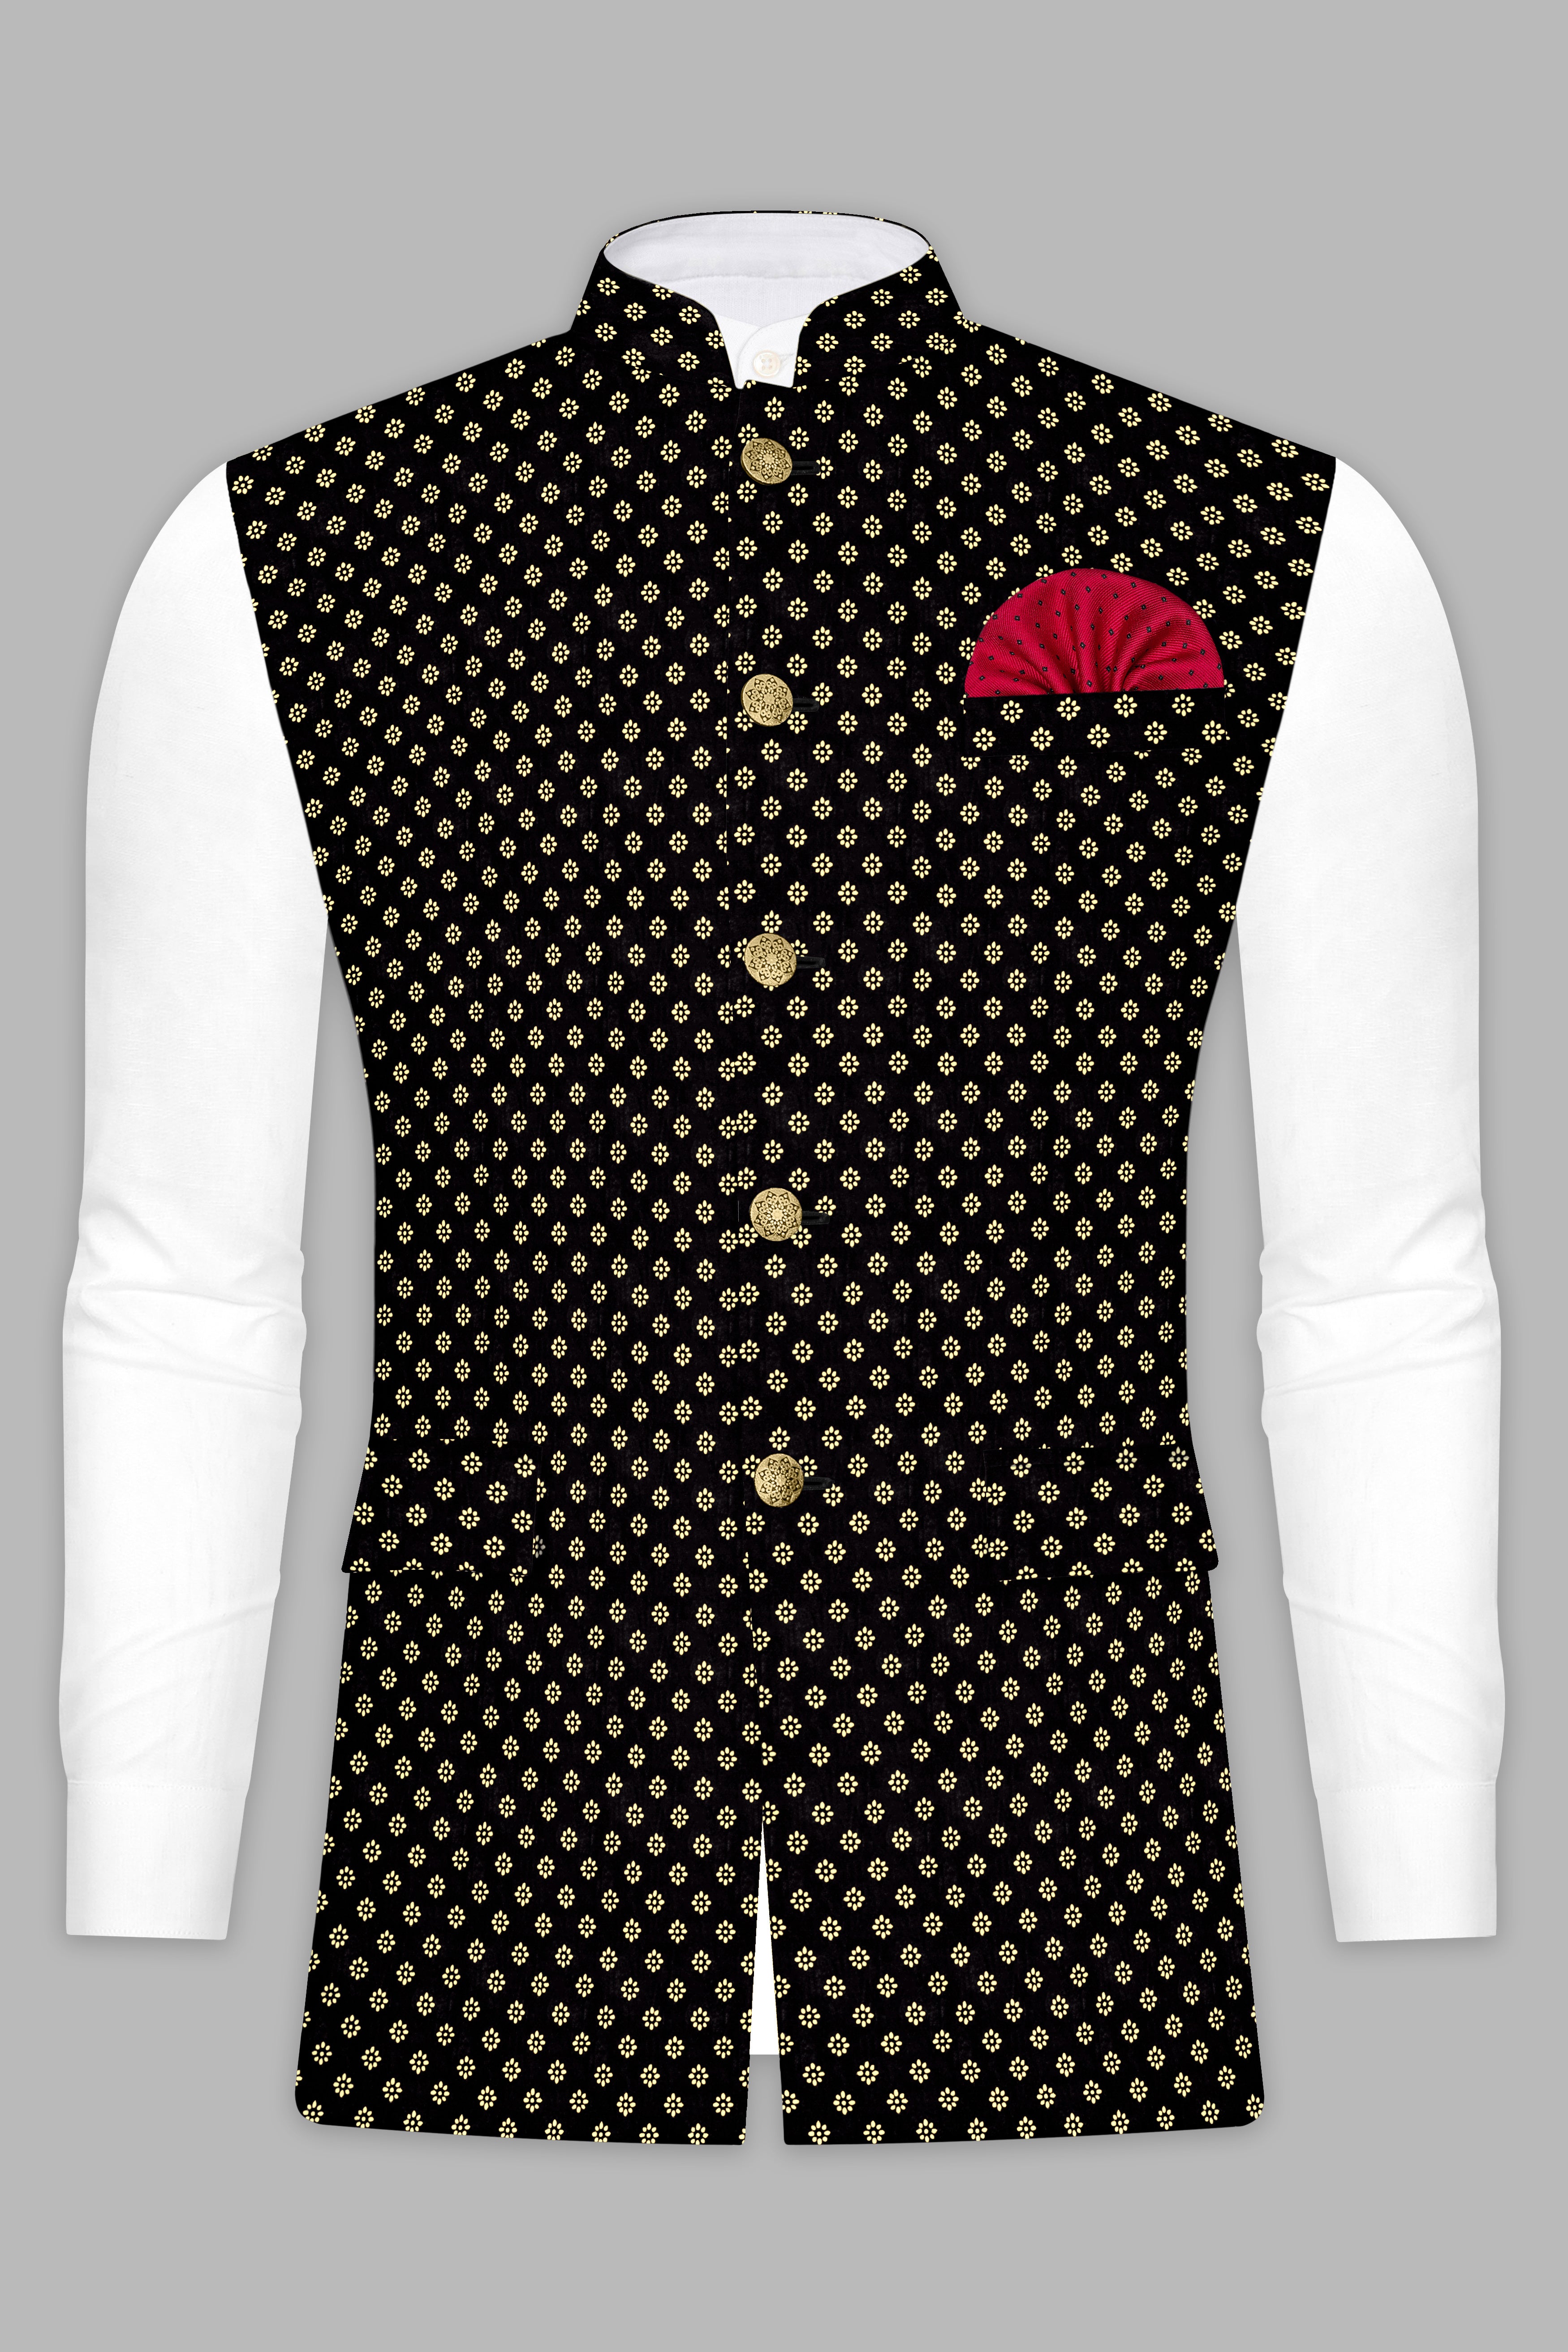 Latest Men's Ethnic Wear Online| From Traditional to Contemporary | Shop Now